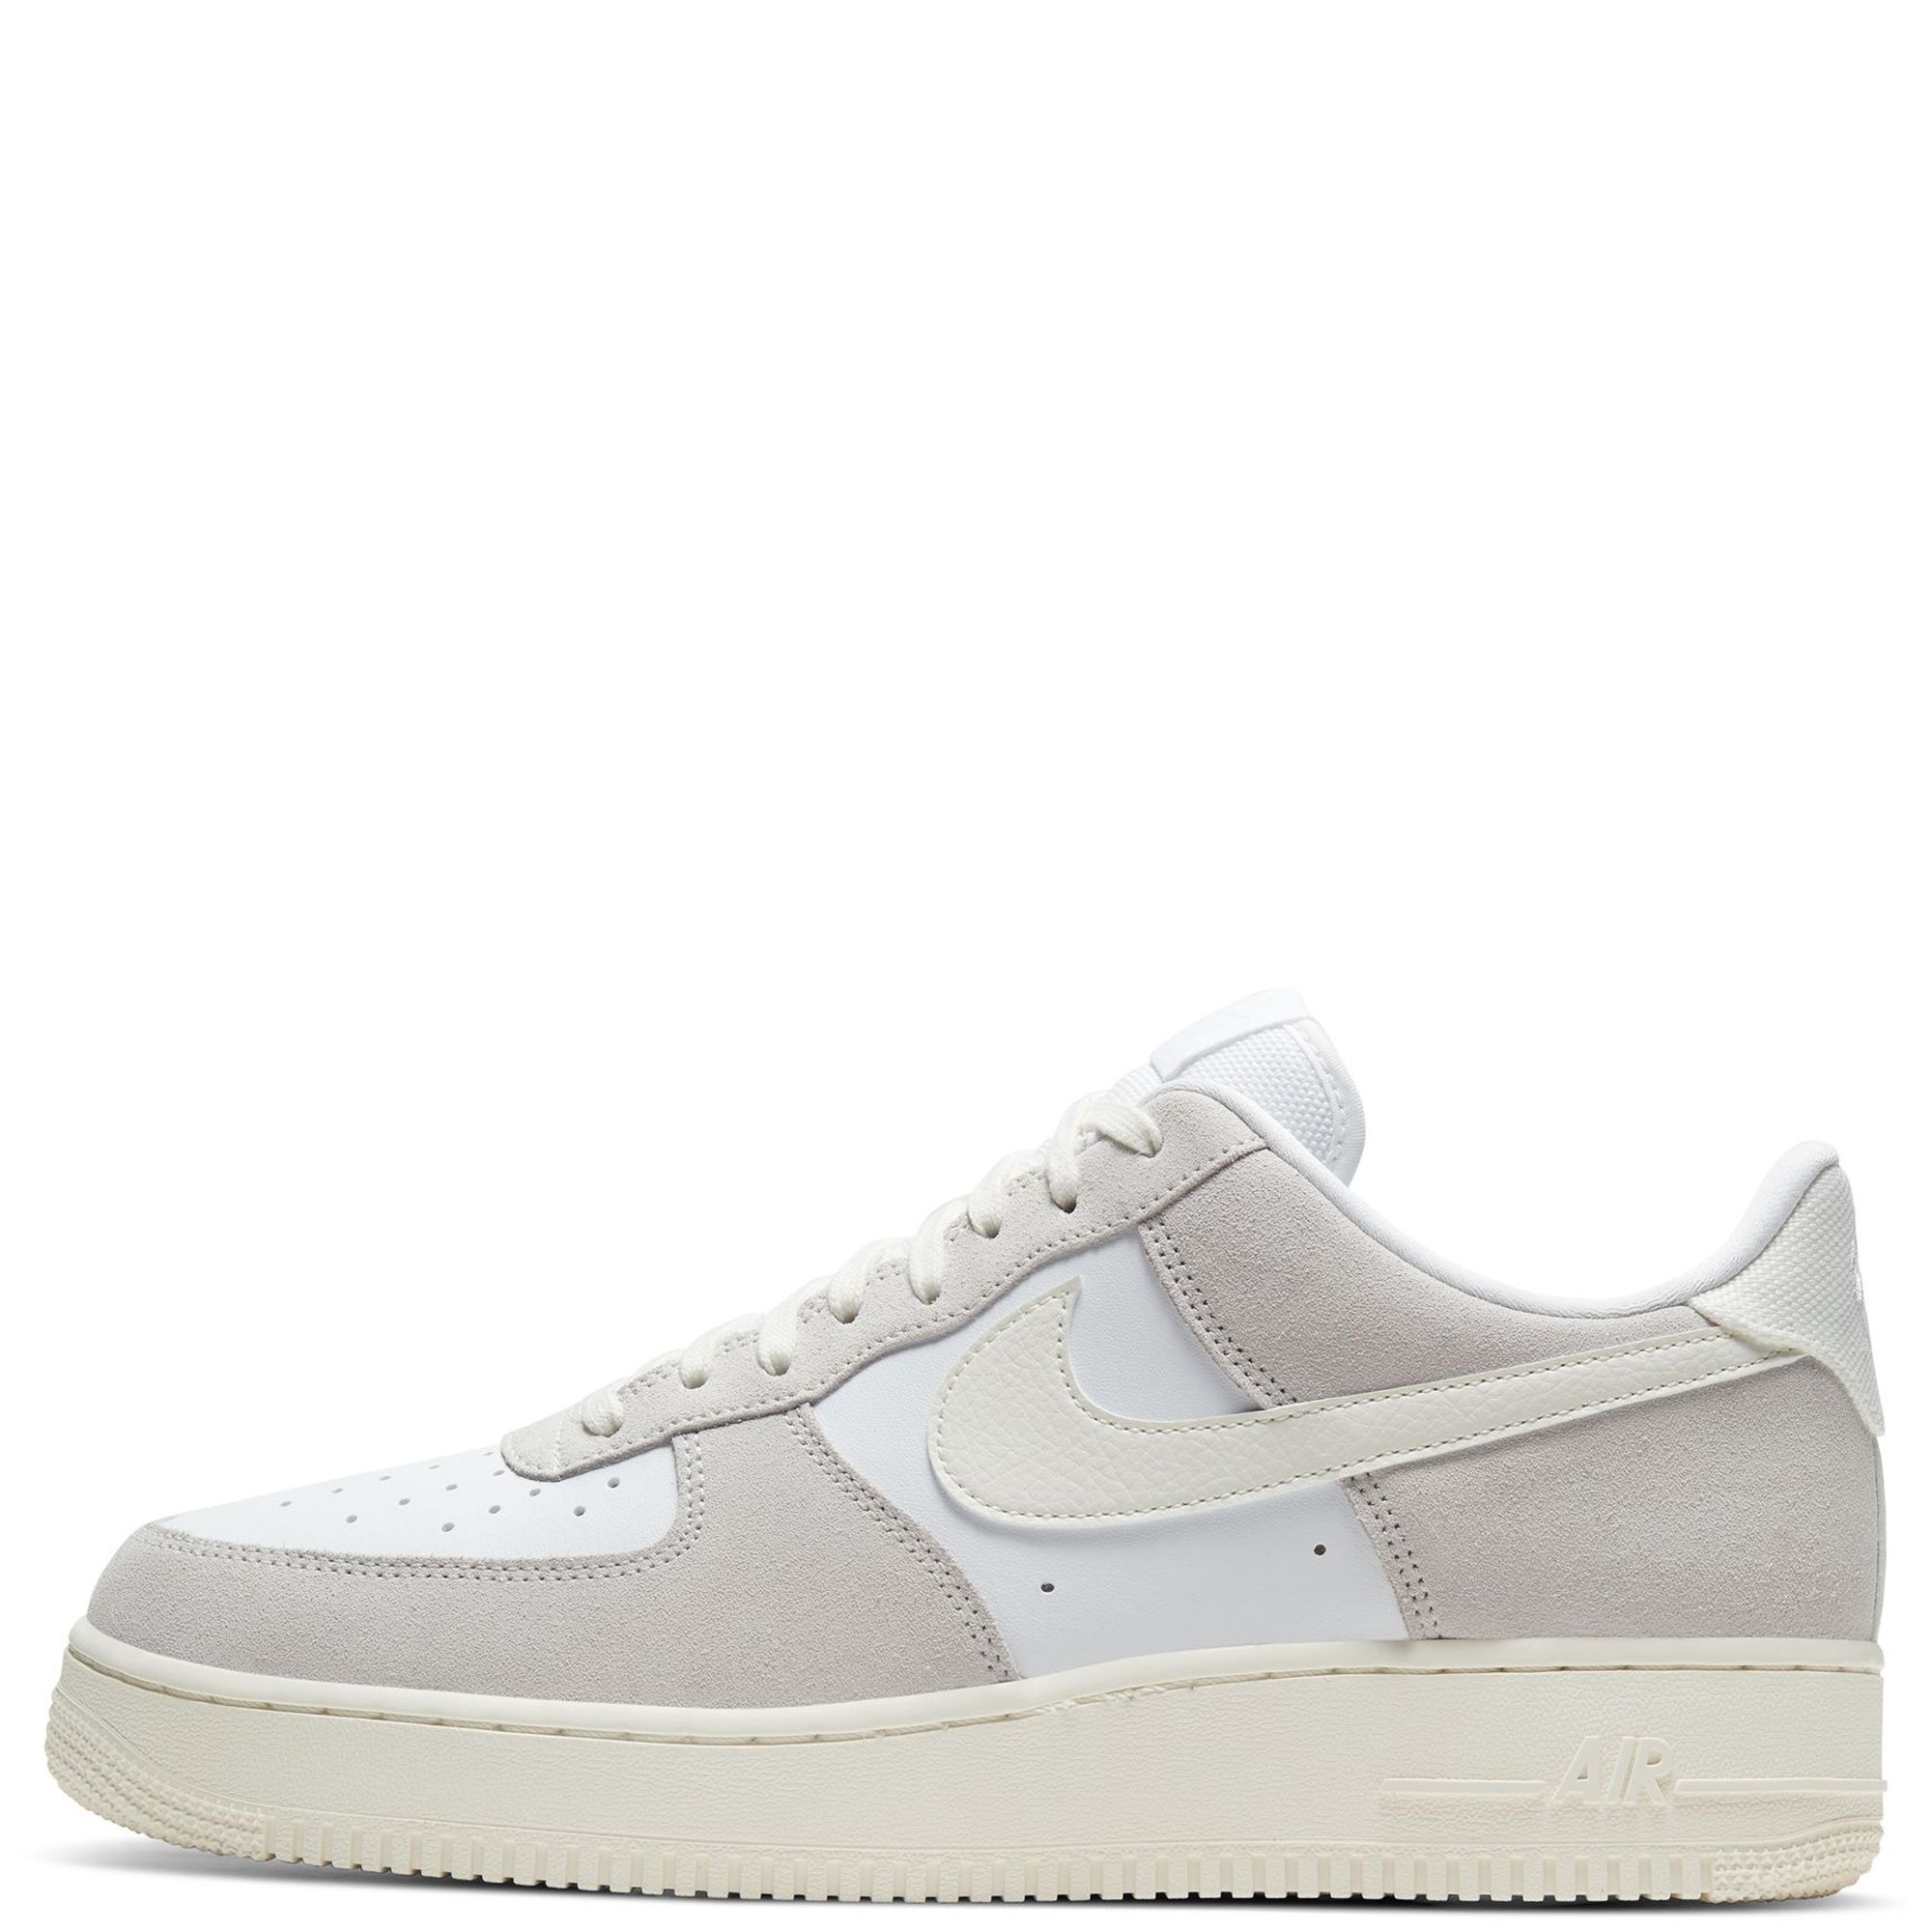 Nike Air Force 1 Low Crater Sail (Women's)